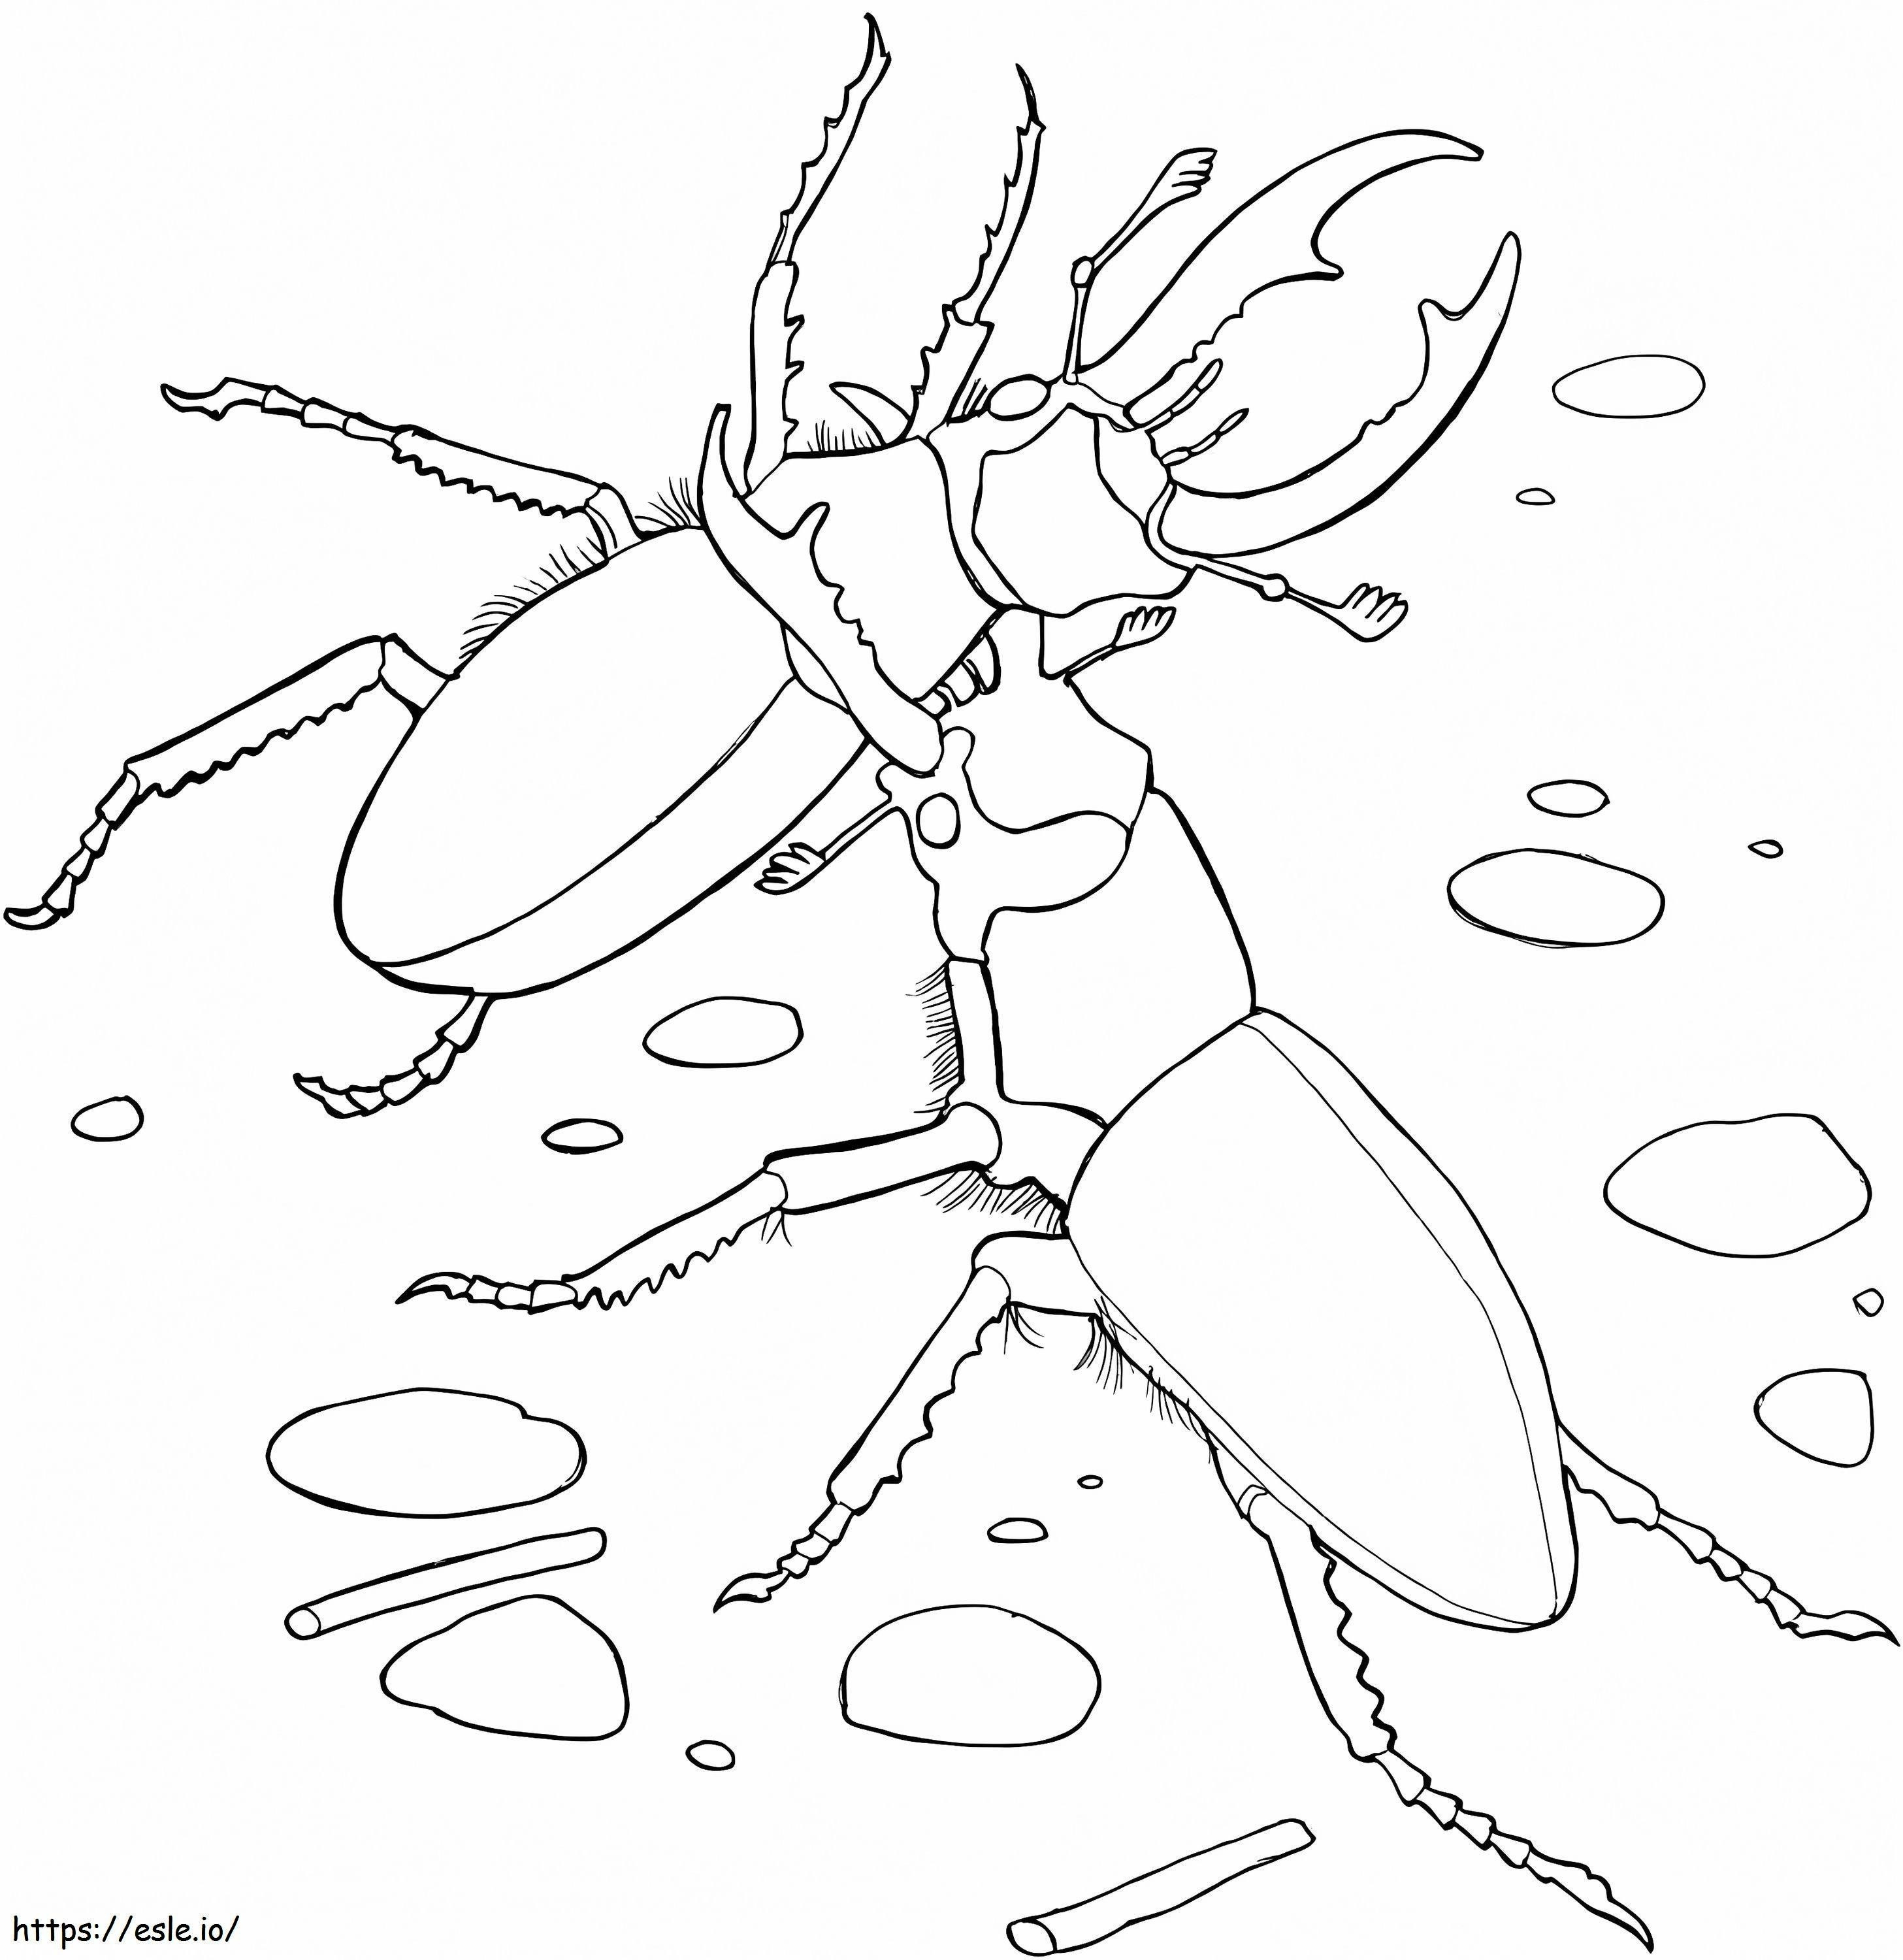 Elephant Stag Beetles coloring page